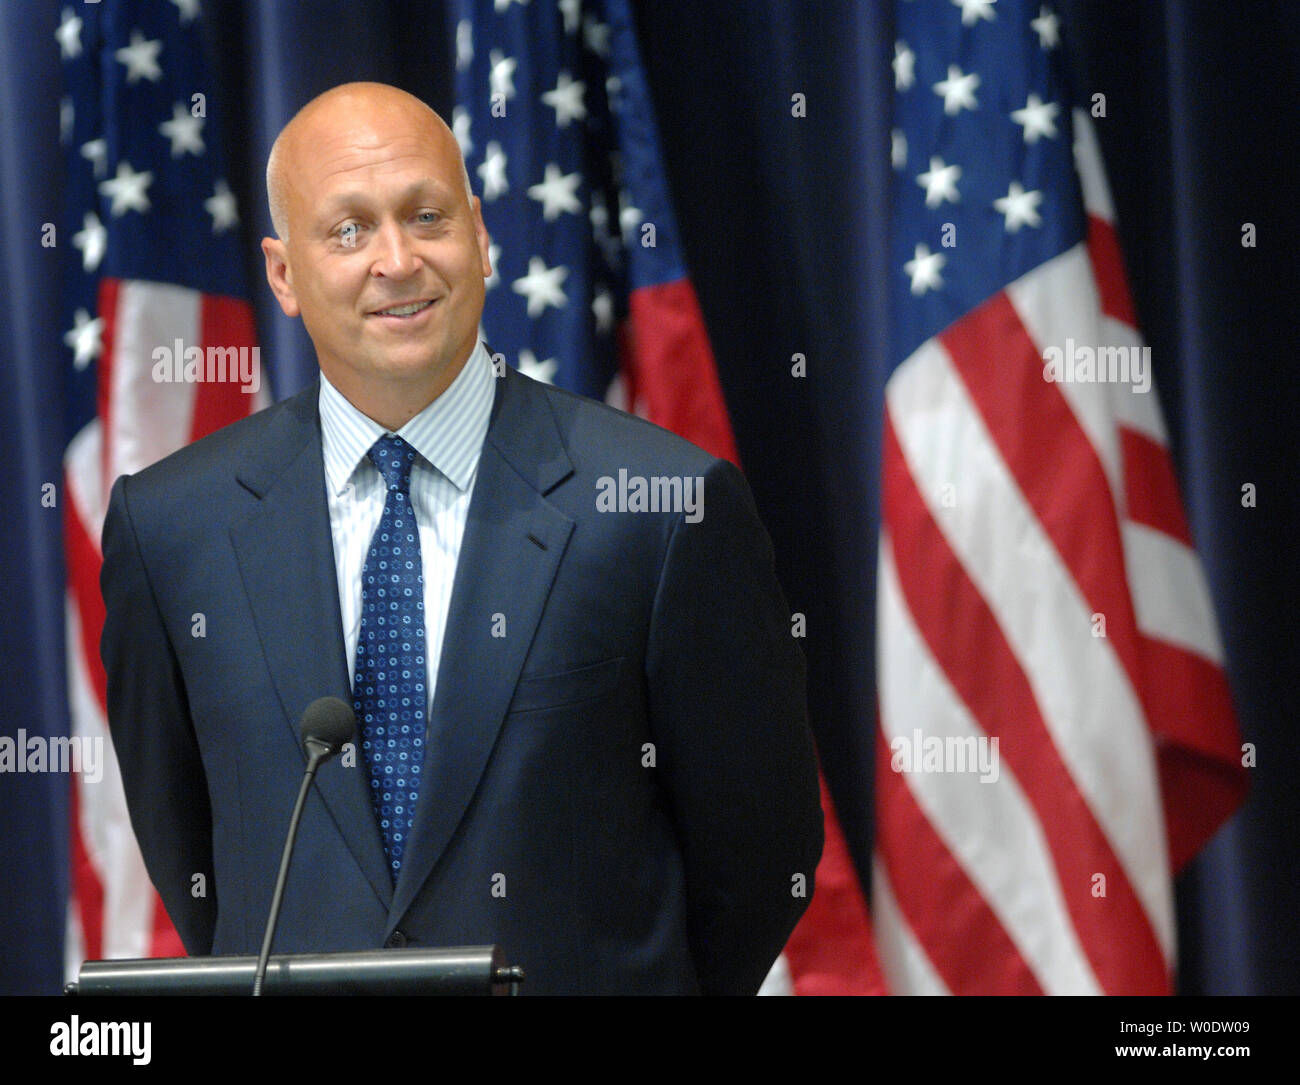 Baseball Hall of Famer Cal Ripken Jr. speaks to the media after being announced as a special sports envoy to the State Department during a ceremony at the State Department in Washington on August 13, 2007. (UPI Photo/Kevin Dietsch) Stock Photo